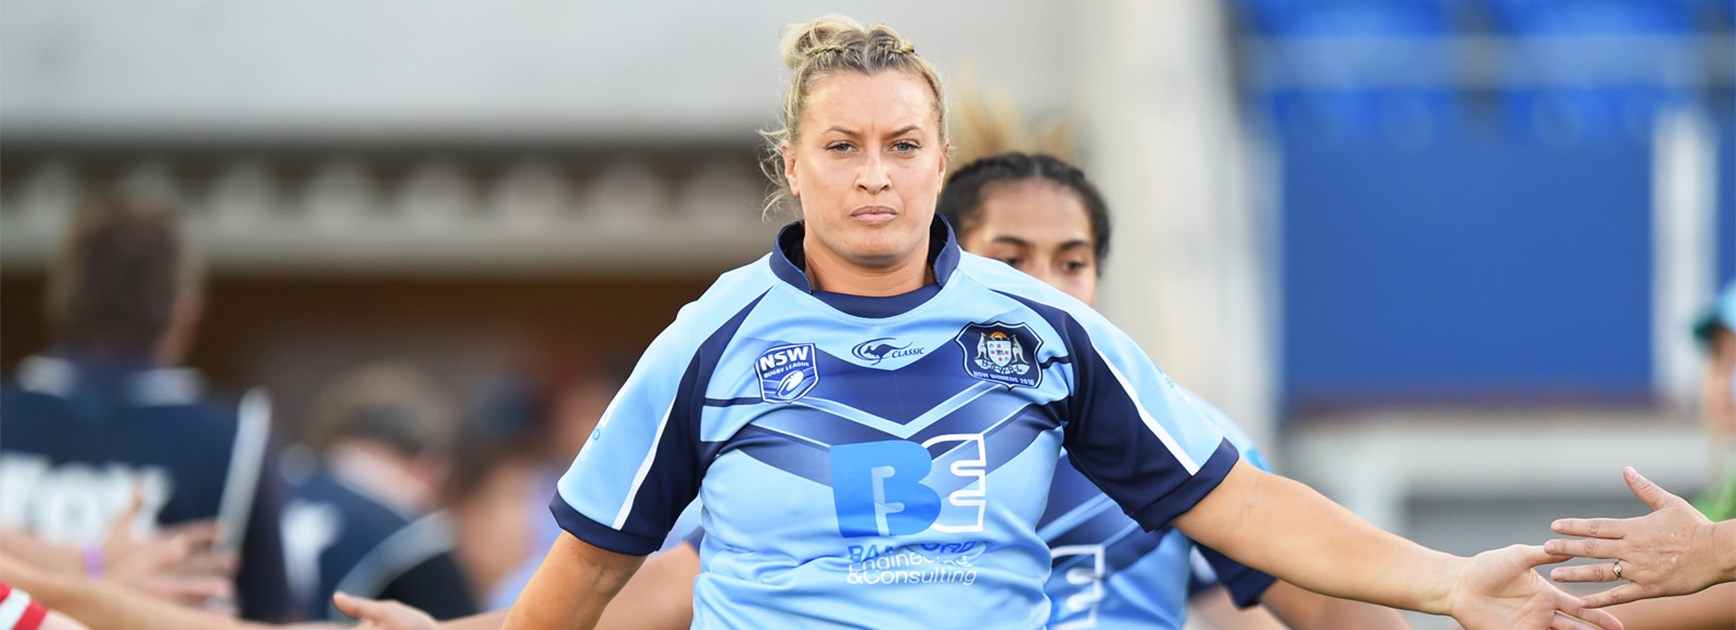 Ruan Sims leads out the women's NSW team to face Queensland last week.